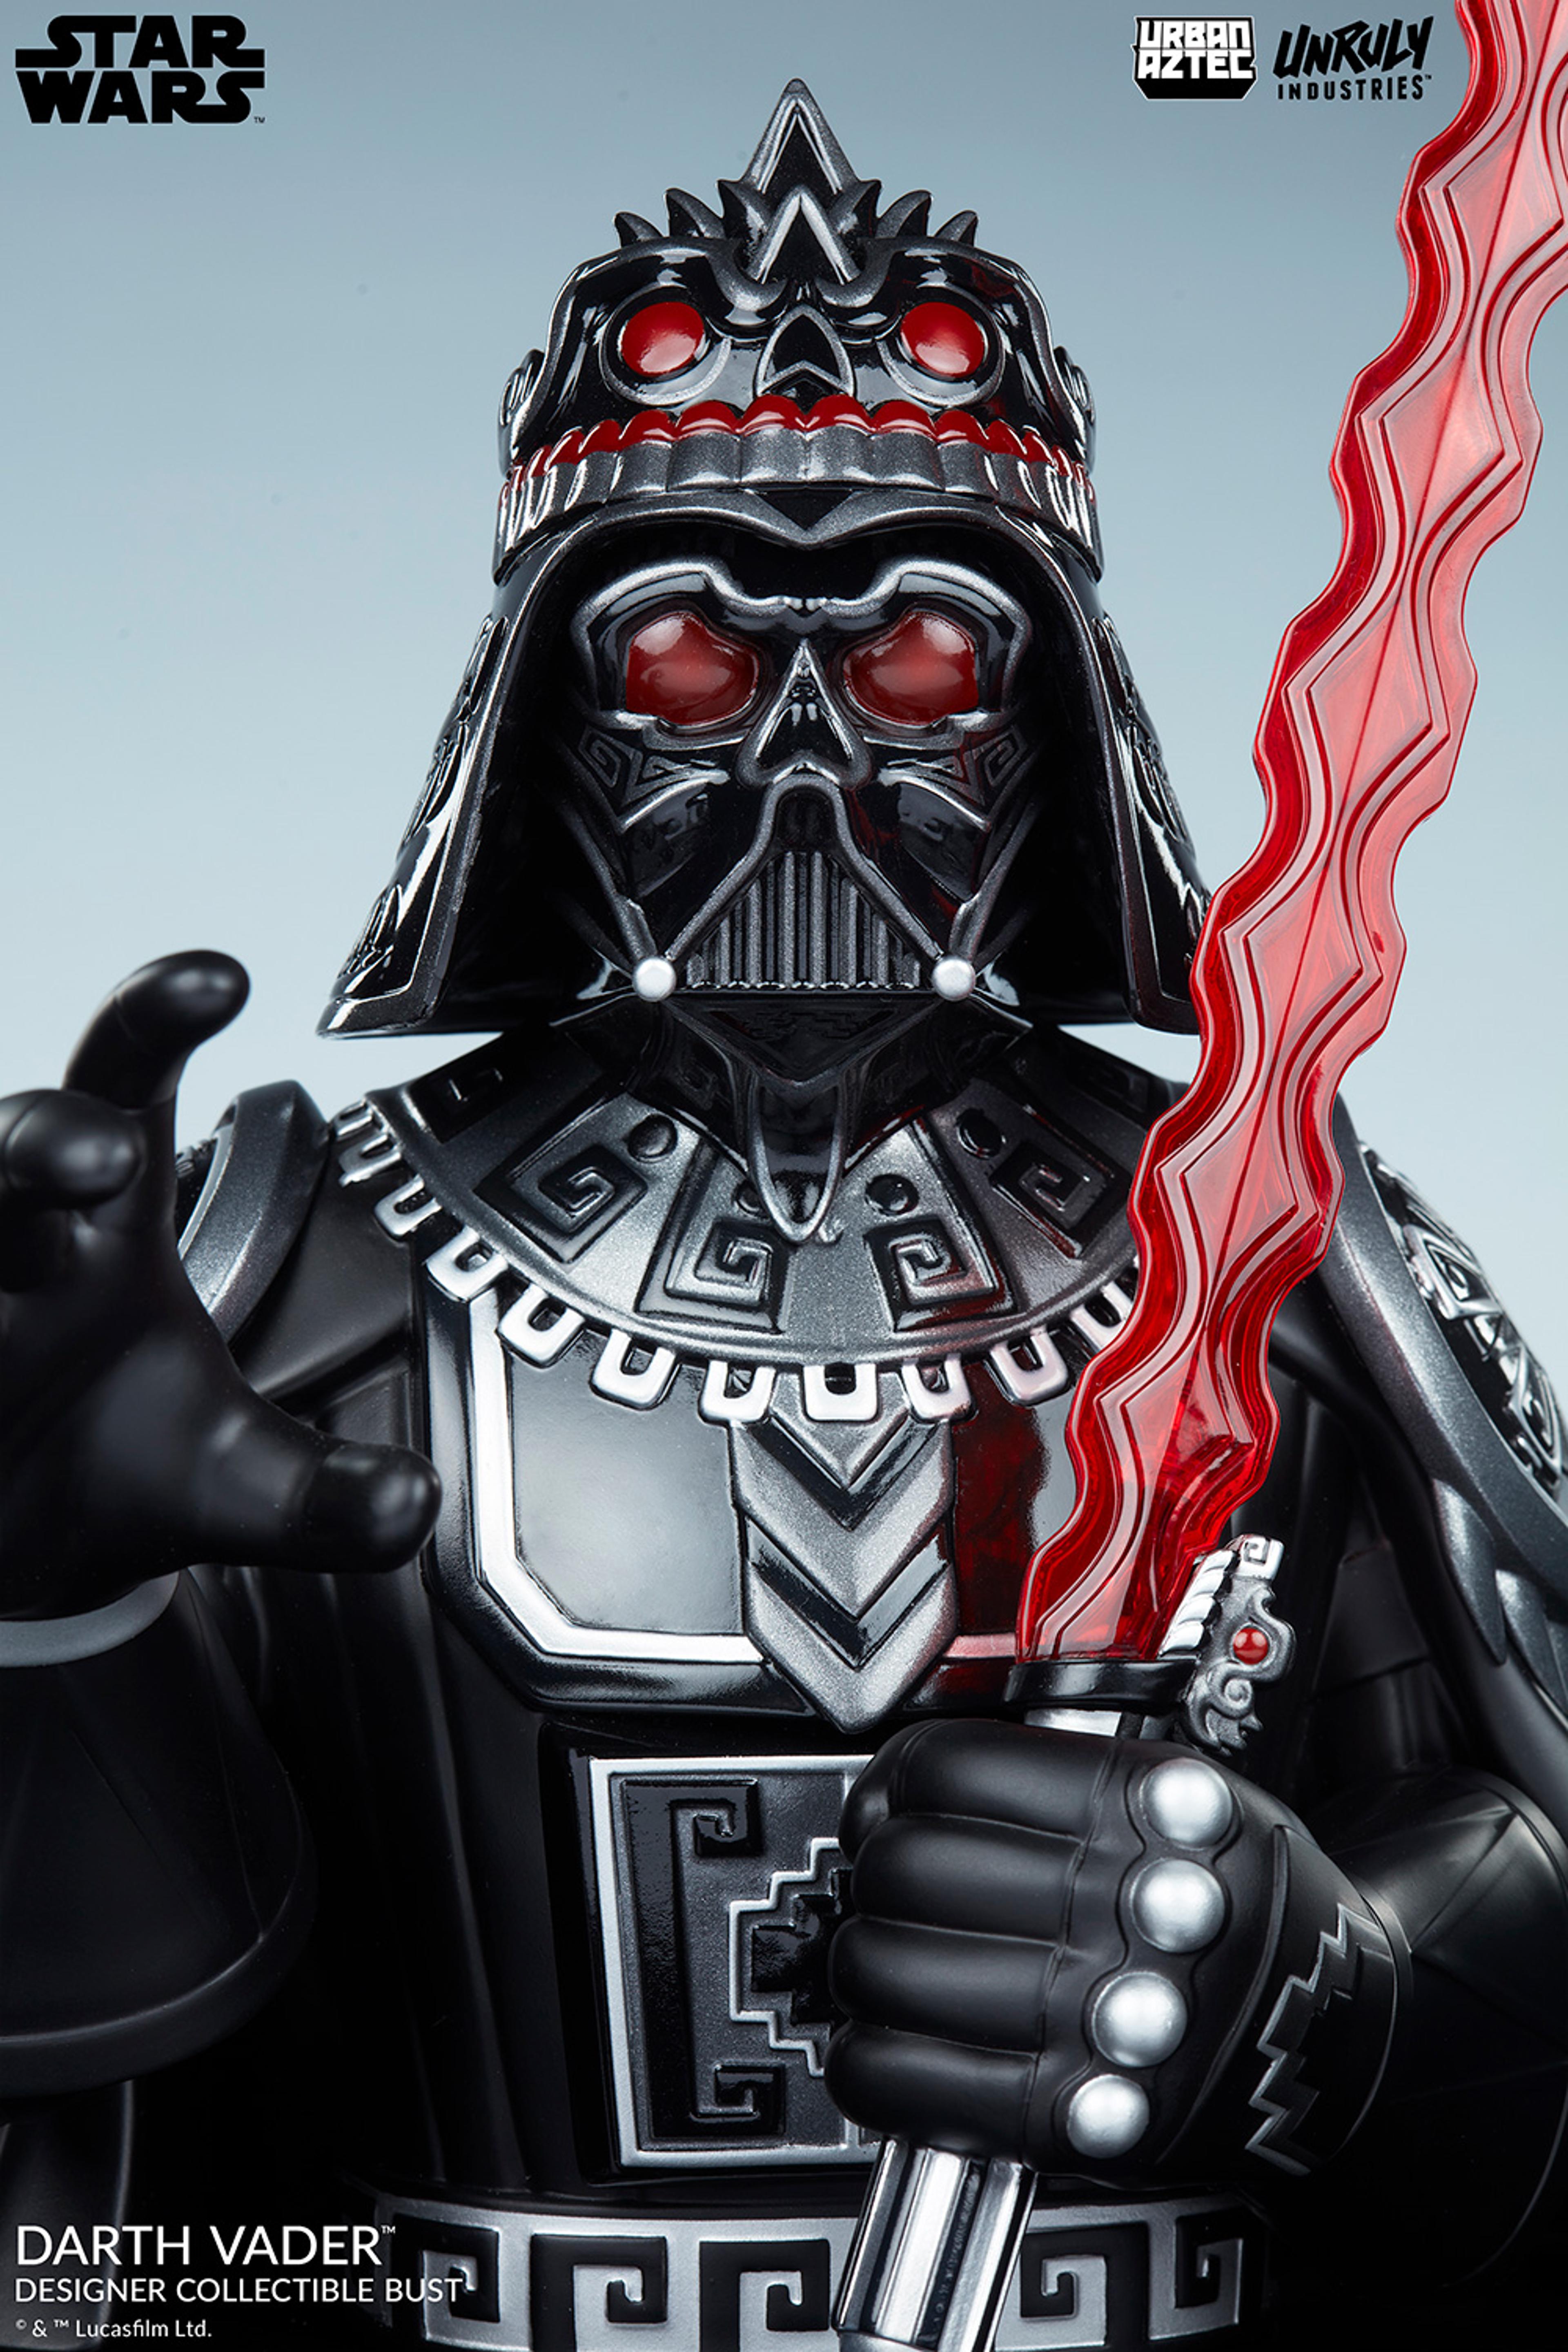 DARTH VADER Designer Collectible Bust by Unruly Industries™